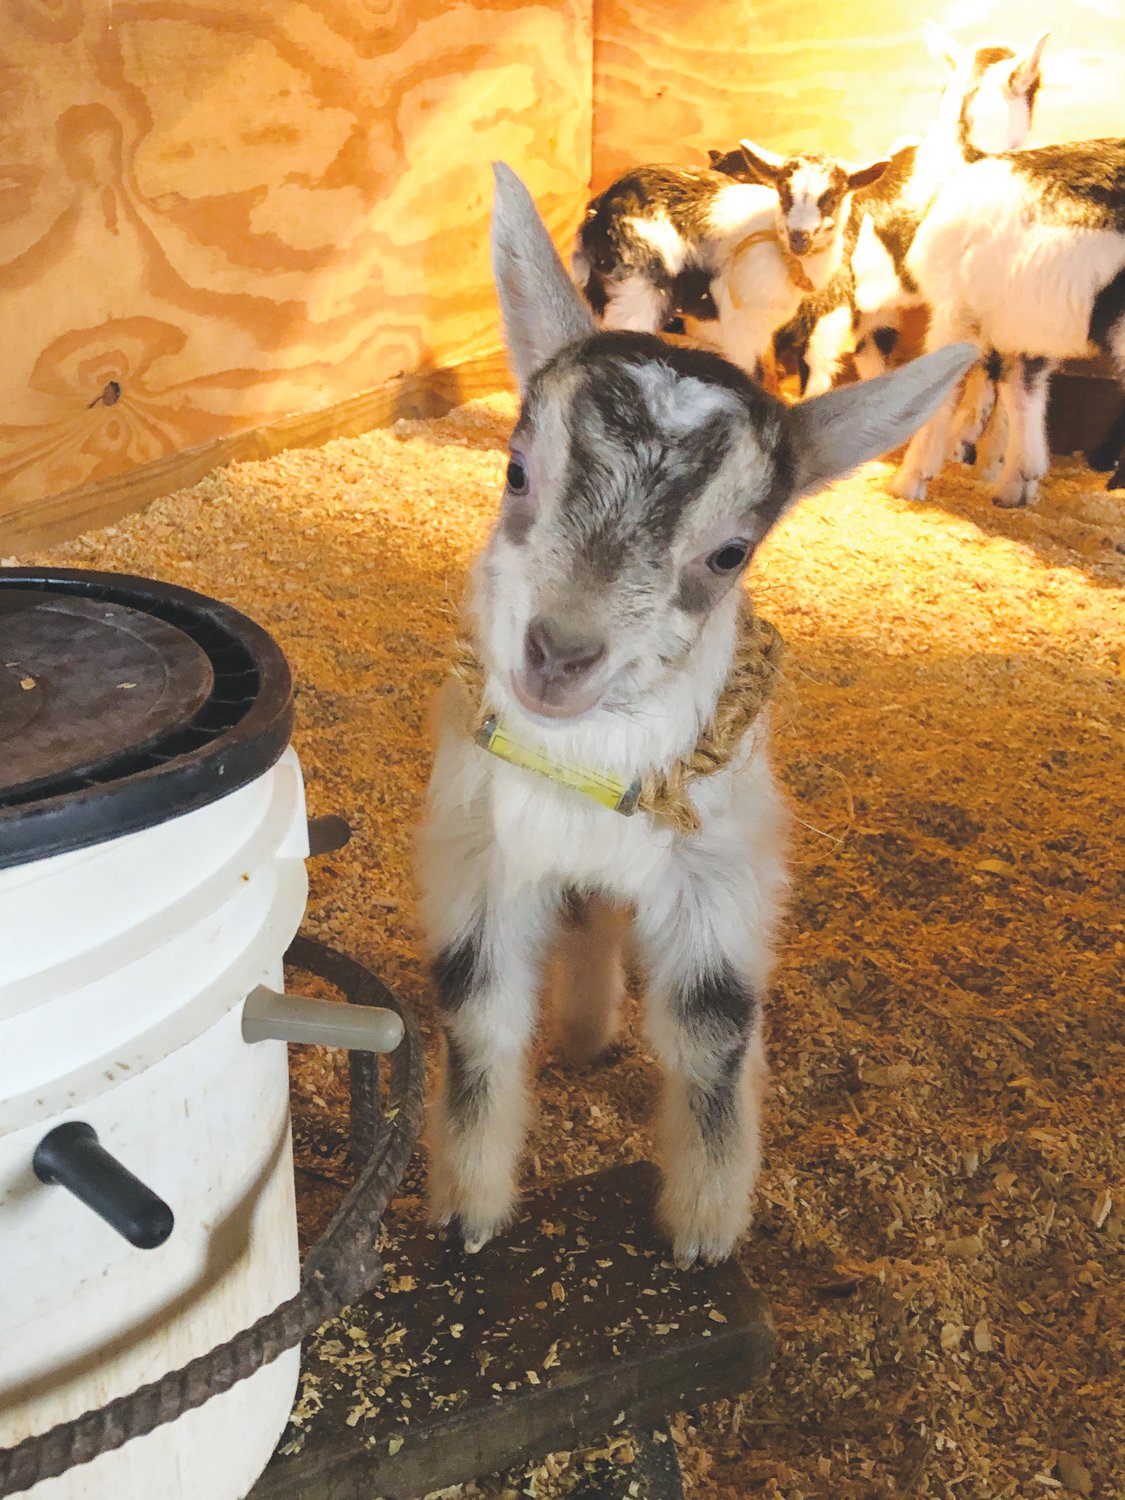 One of the baby goats from past years at Celebrity Dairy.